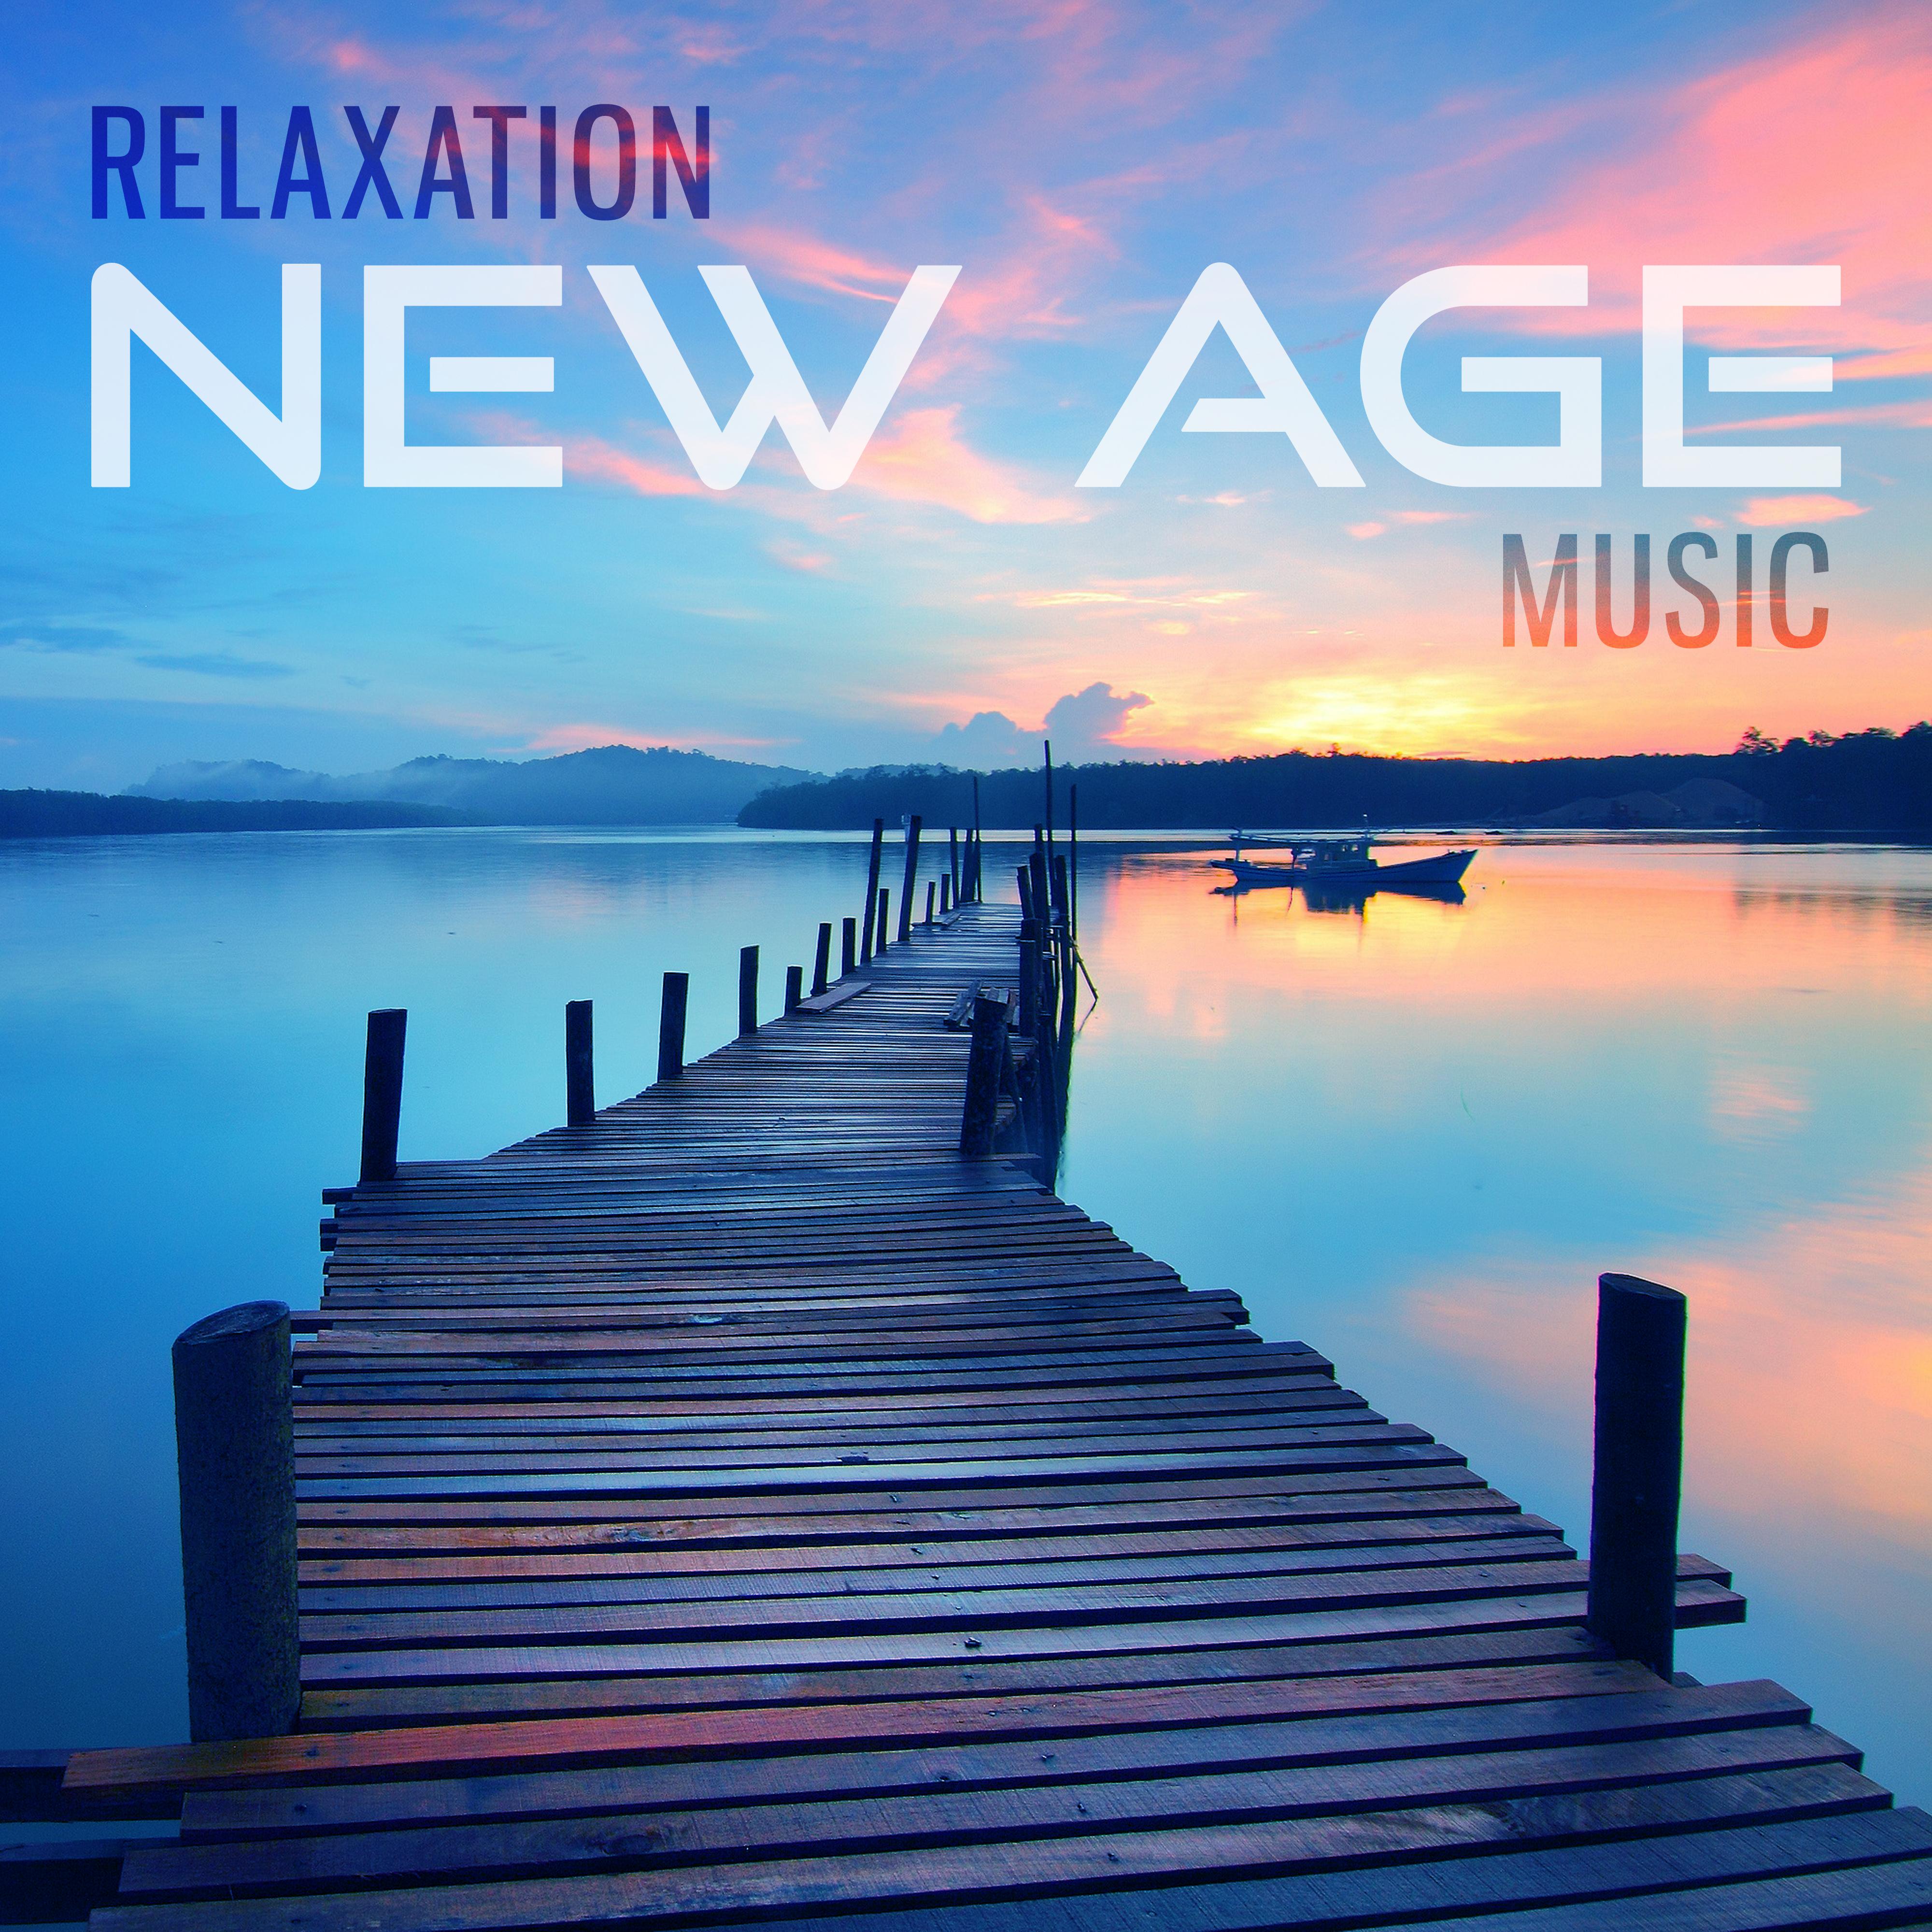 Relaxation New Age Music – Calming Nature Sounds, Birds and Ocean Waves, Selected Relaxing Music, Inner Meditation